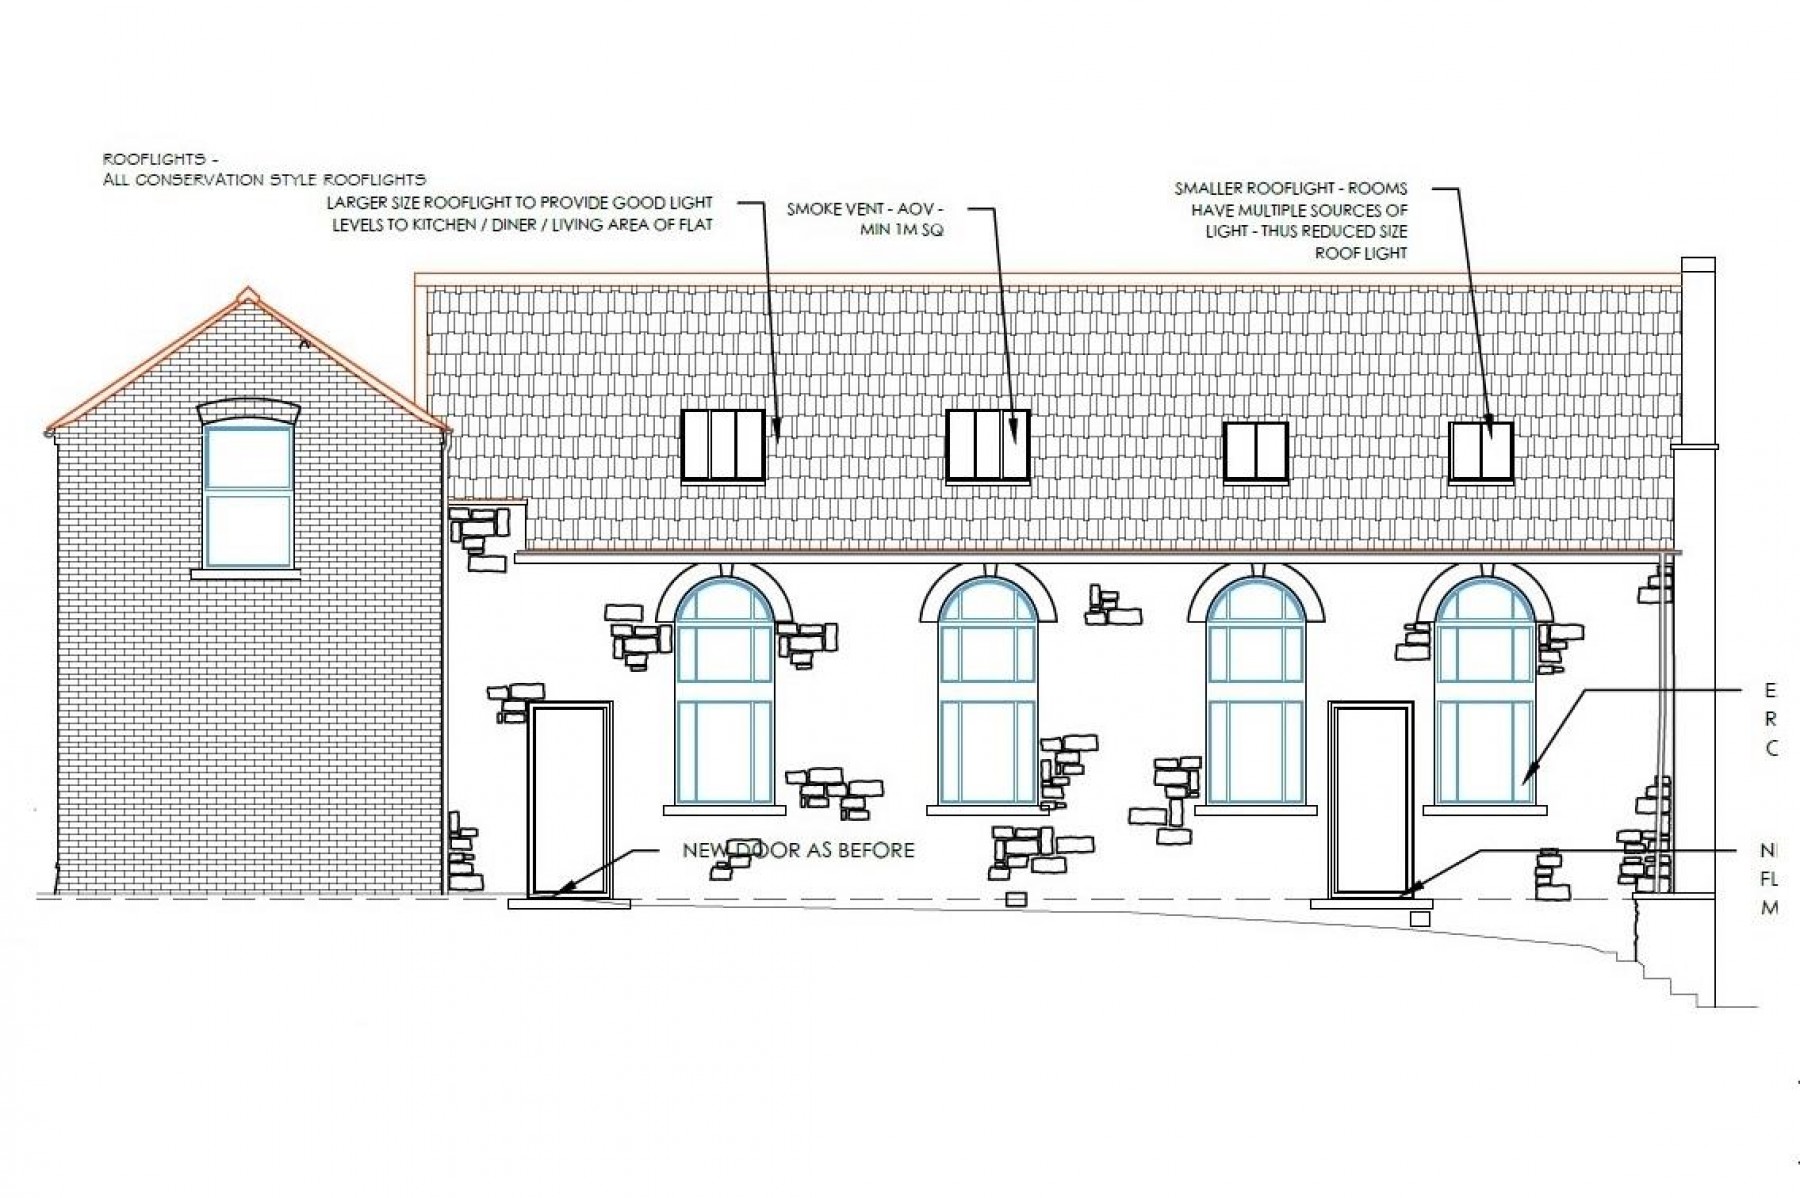 Images for PLANNING GRANTED - 6 FLATS